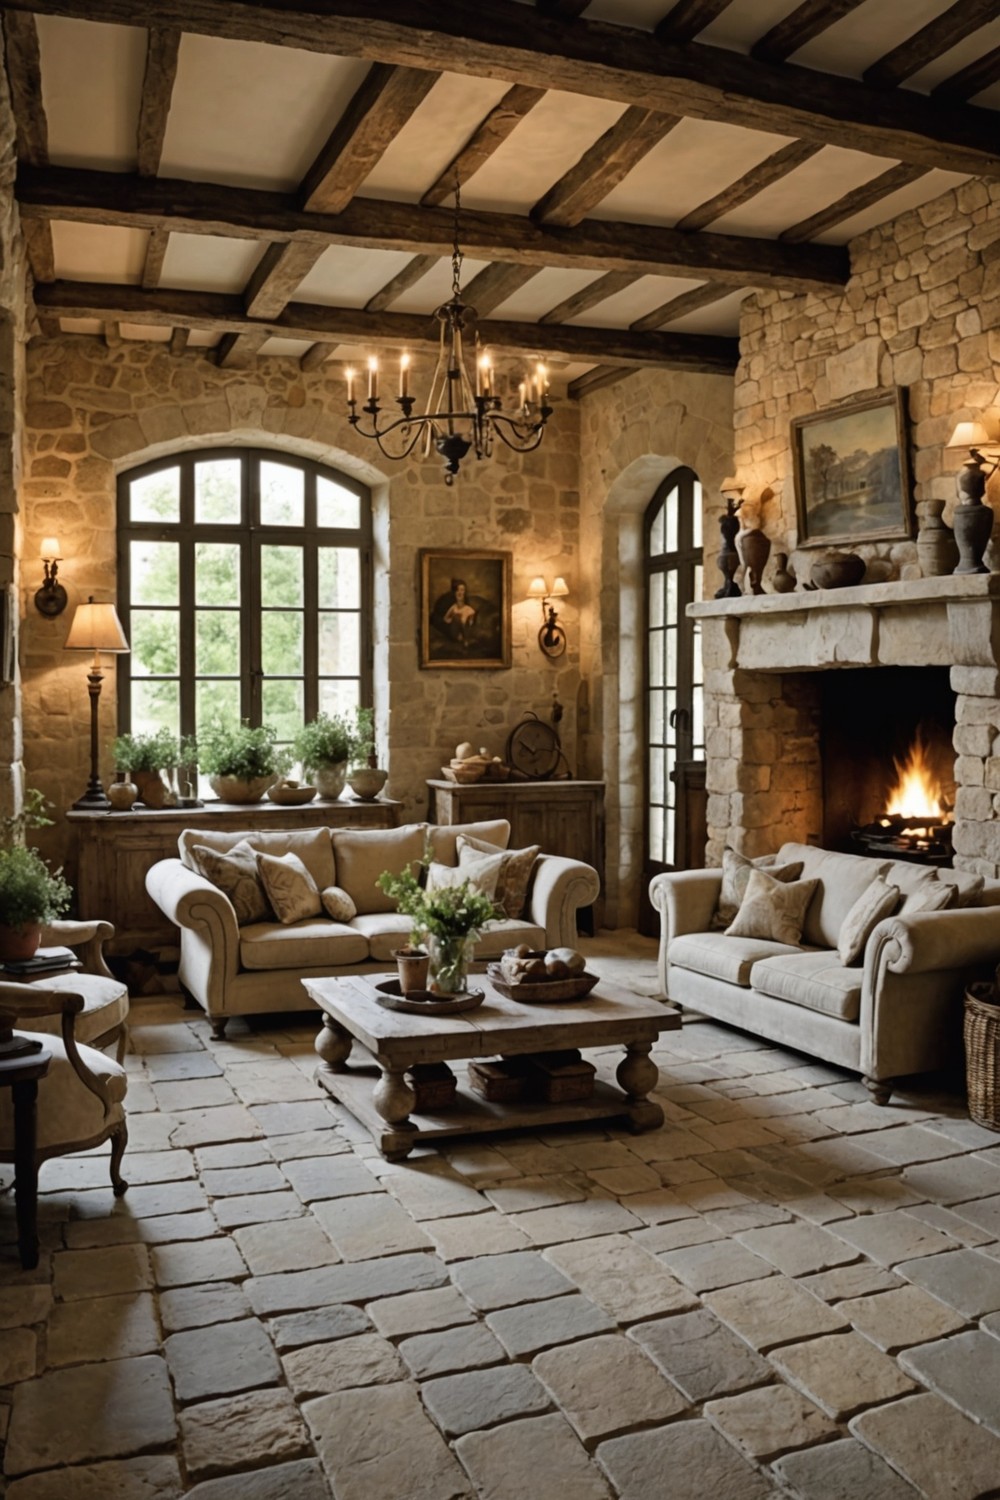 Rustic Stone Flooring and Accent Walls